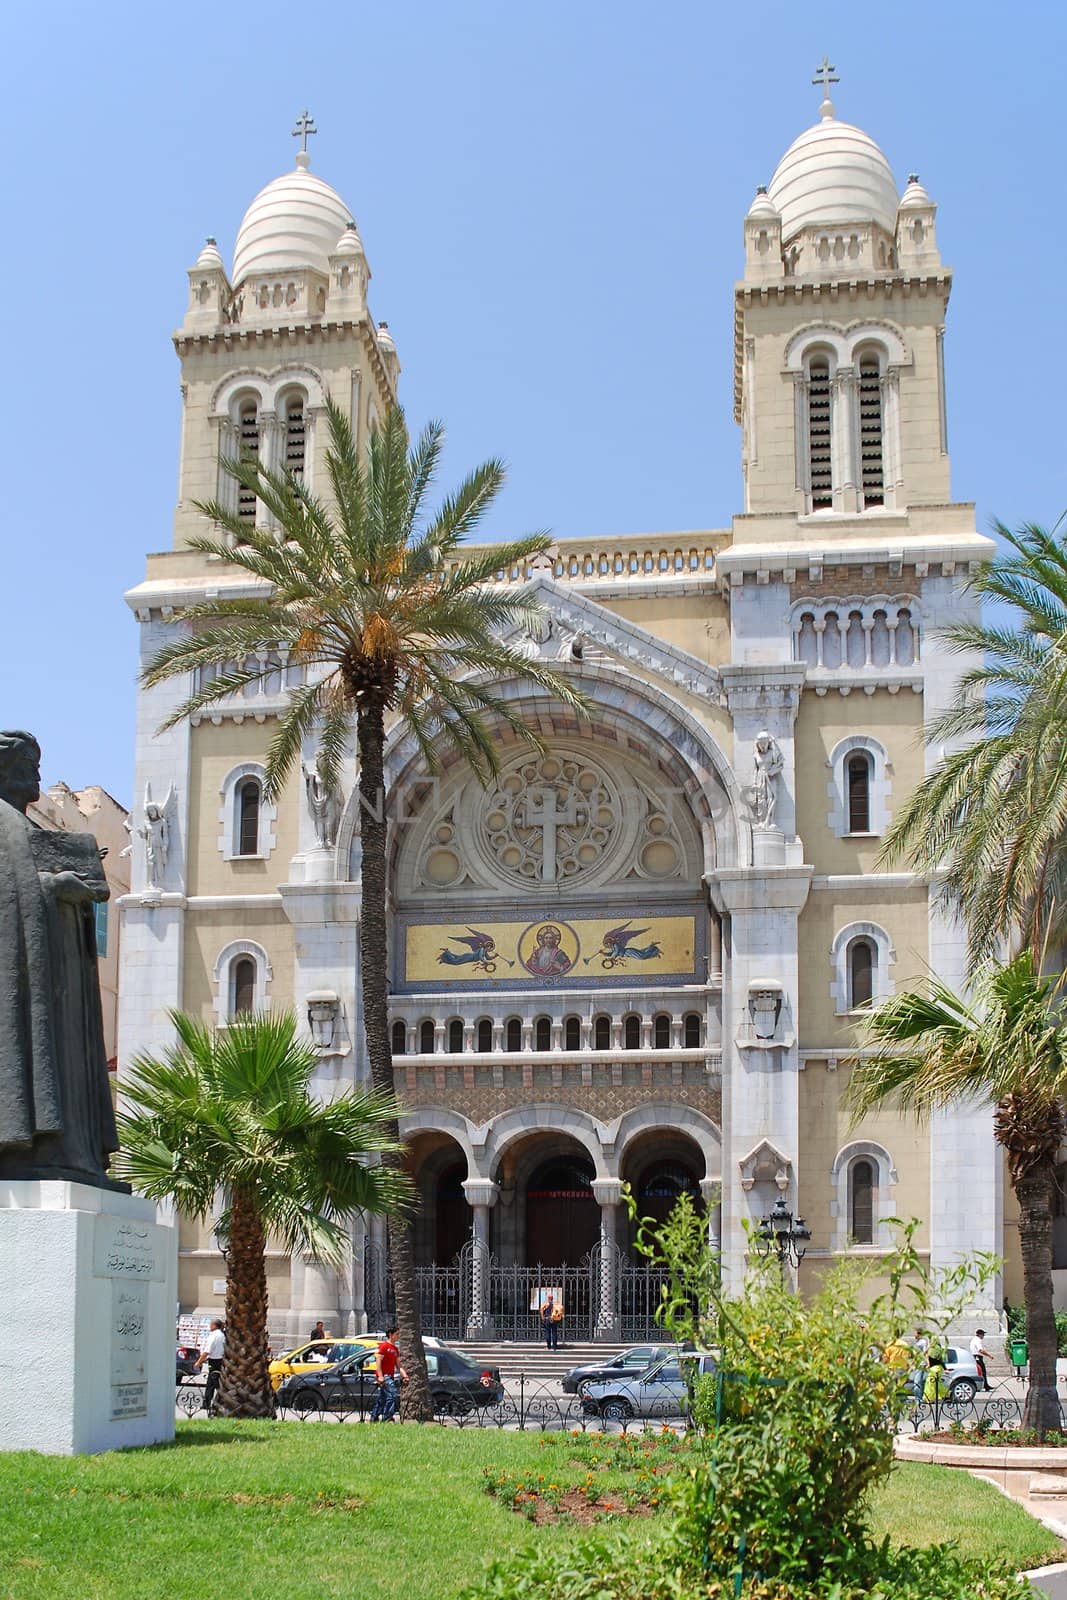 Cathedral of St Vincent de Paul is a Roman Catholic cathedral in Tunis, Tunisia